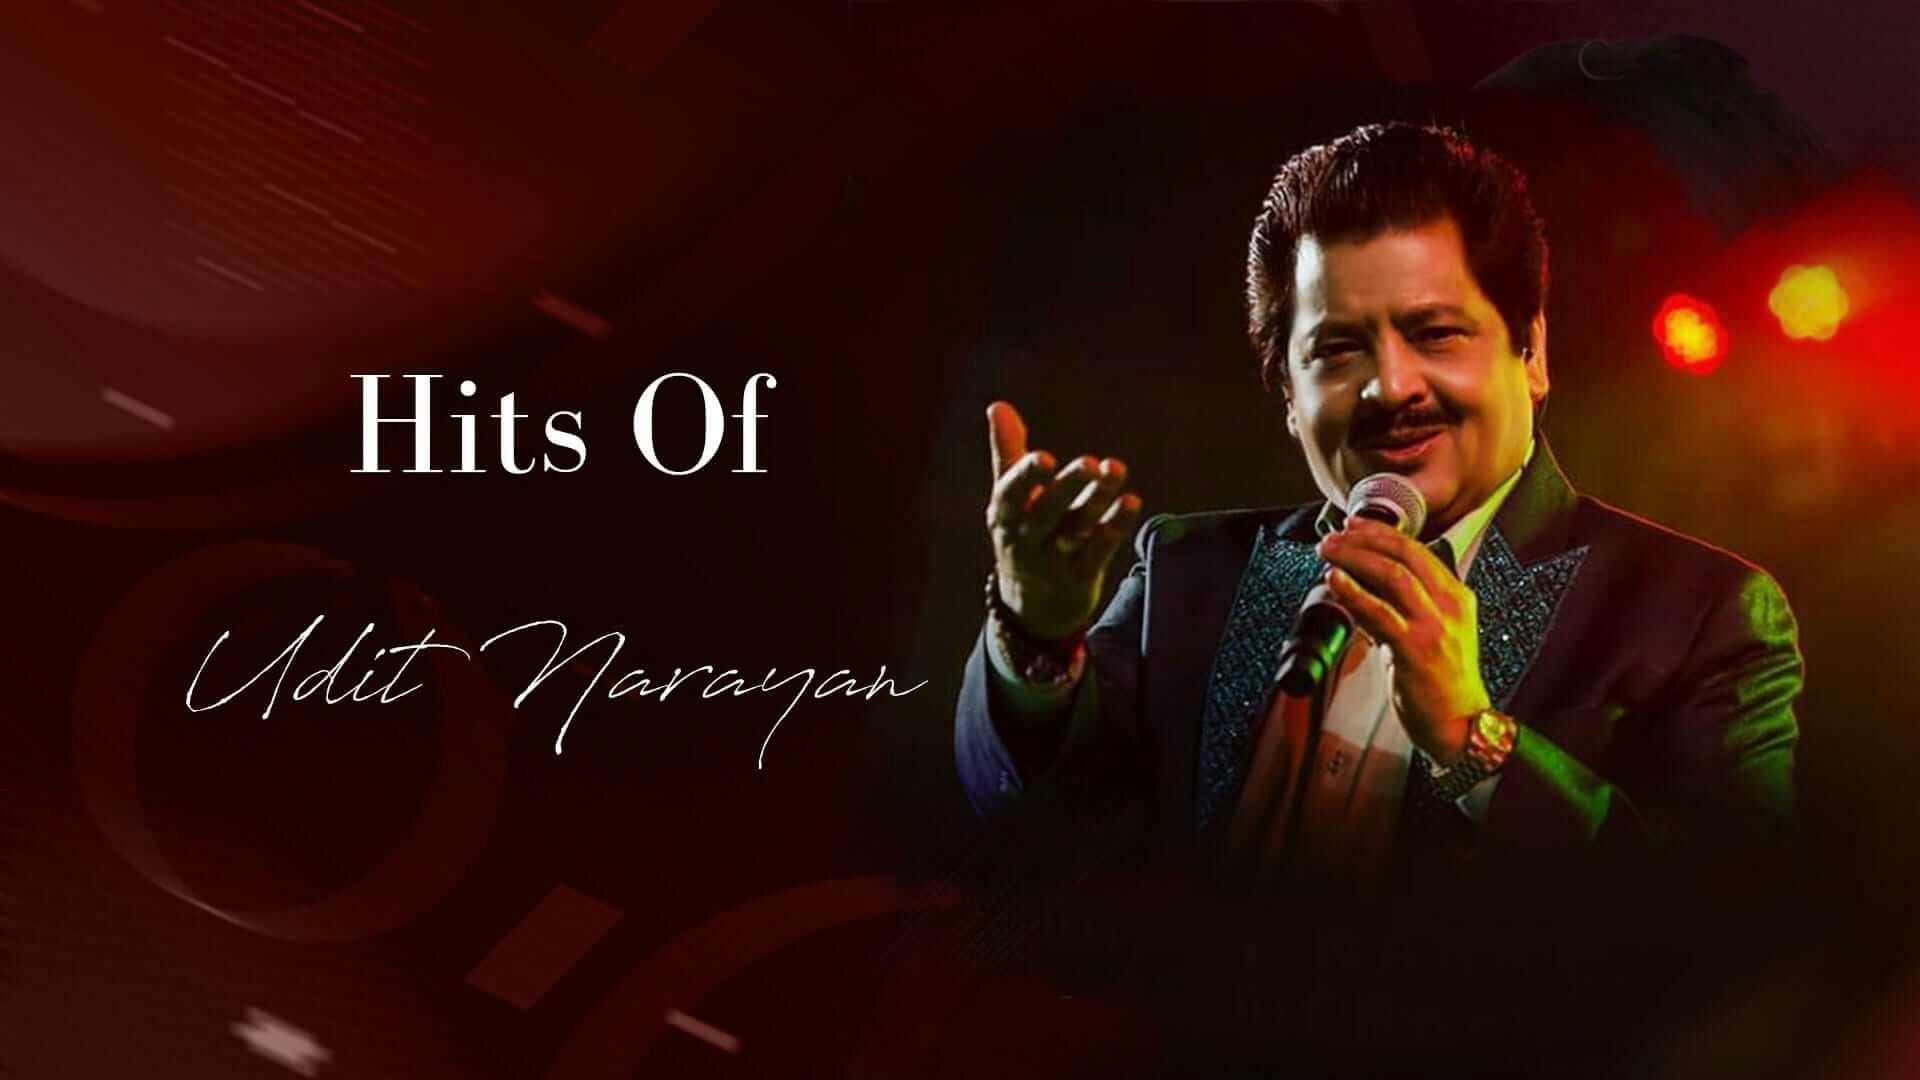 Cover Image for List Of Udit Narayan Songs – 2021 Updates